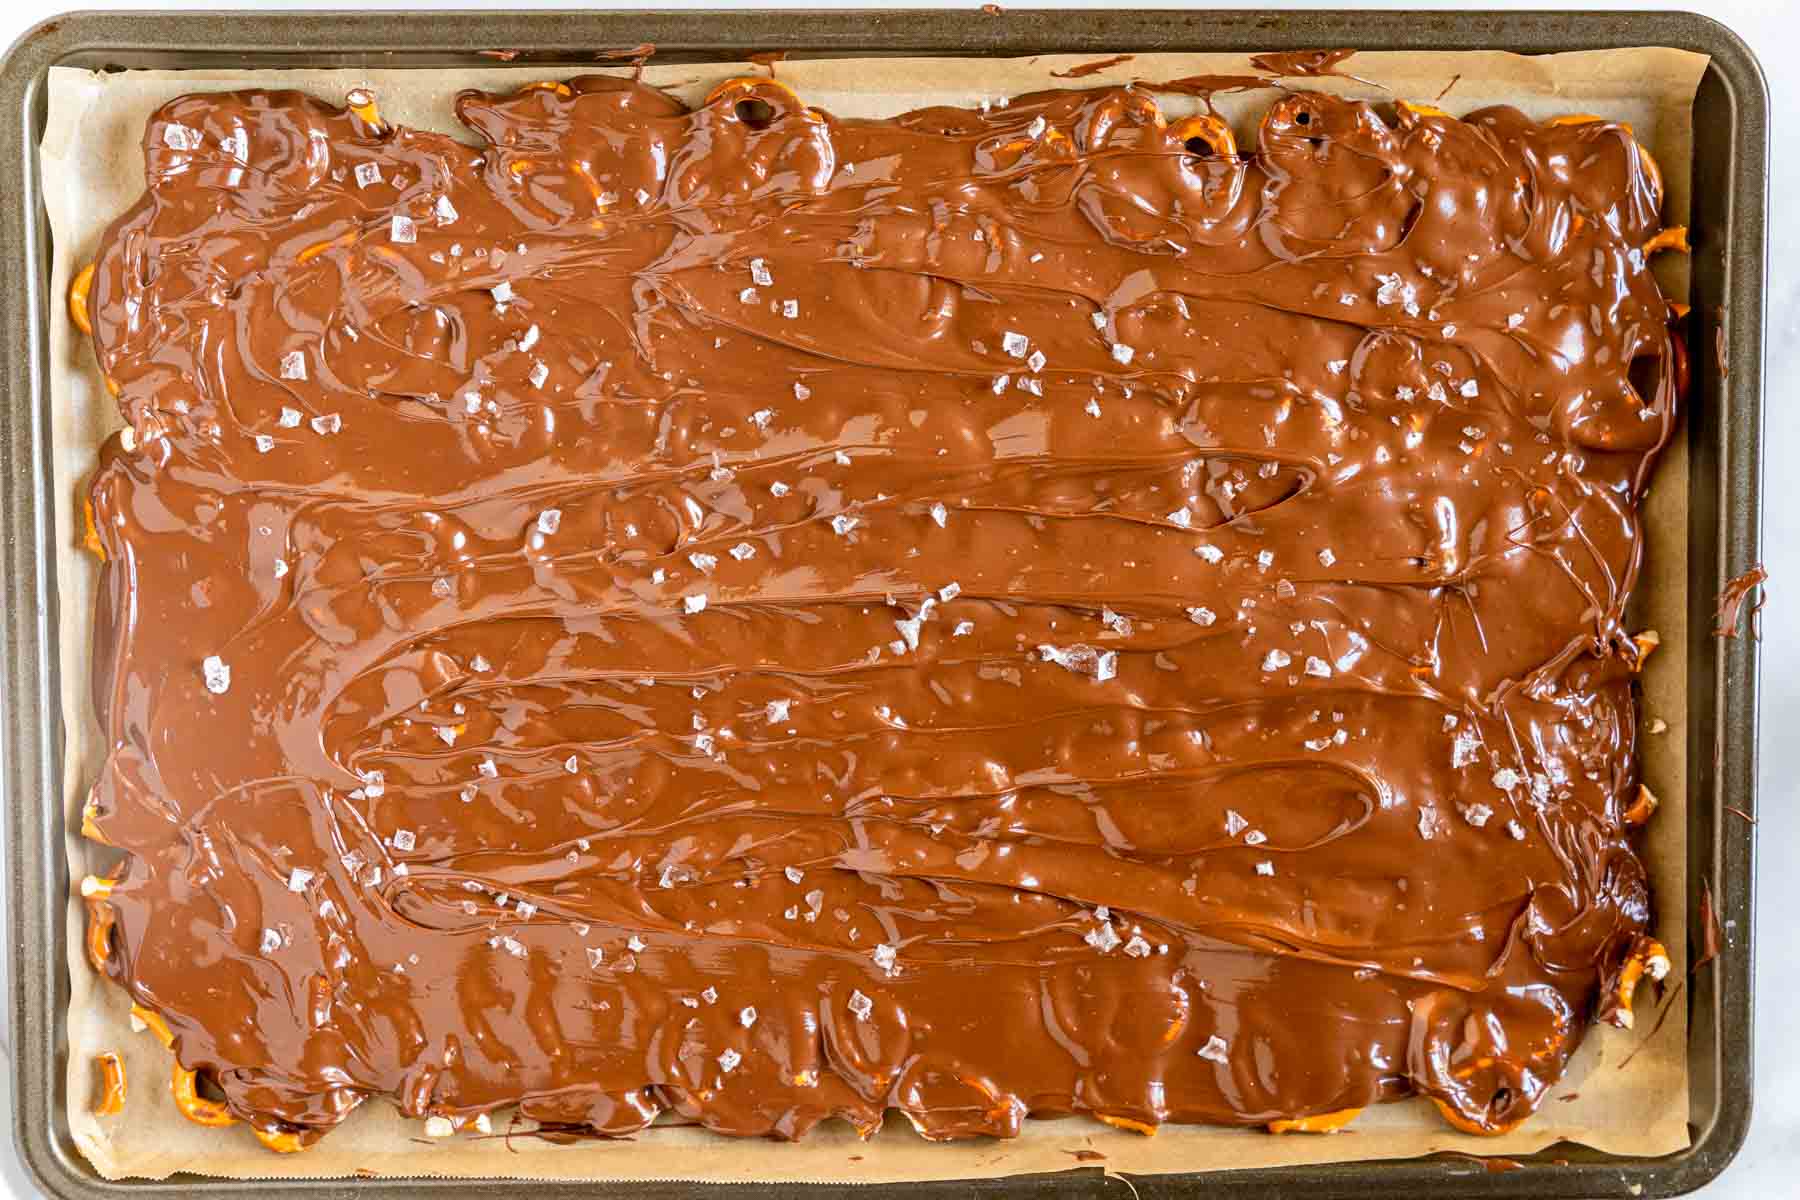 Melted chocolate covering pretzel pieces and sprinkled with flaky sea salt - Hostess At Heart